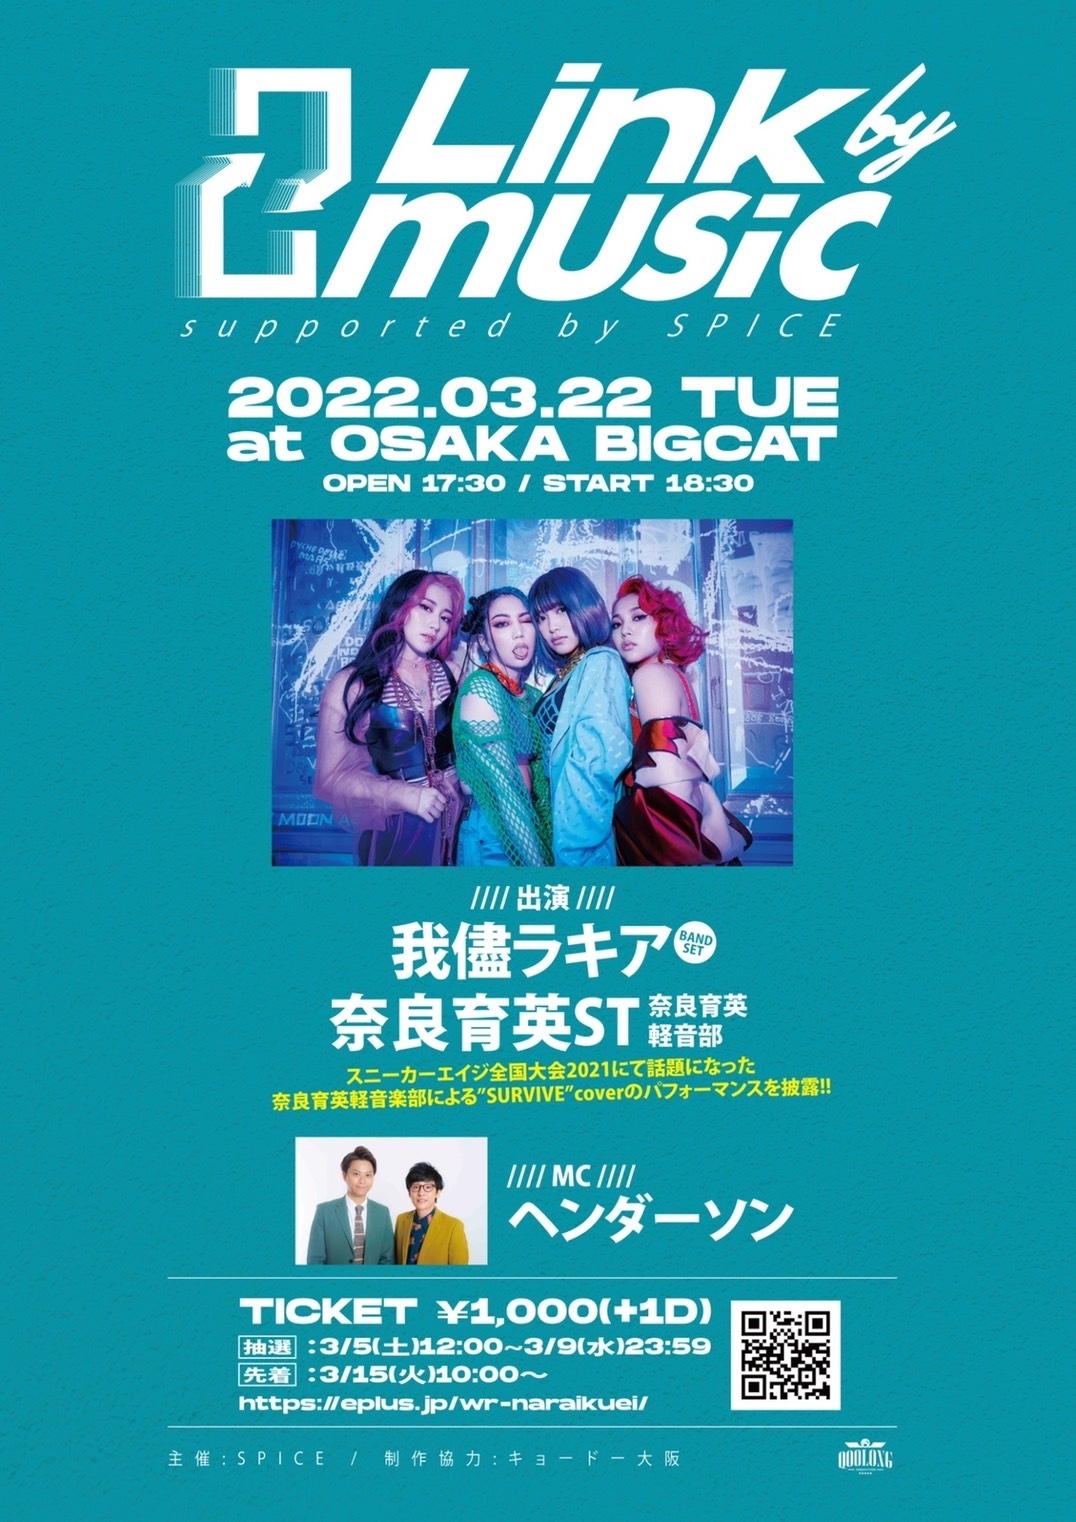 『Link by music  supported by SPICE』